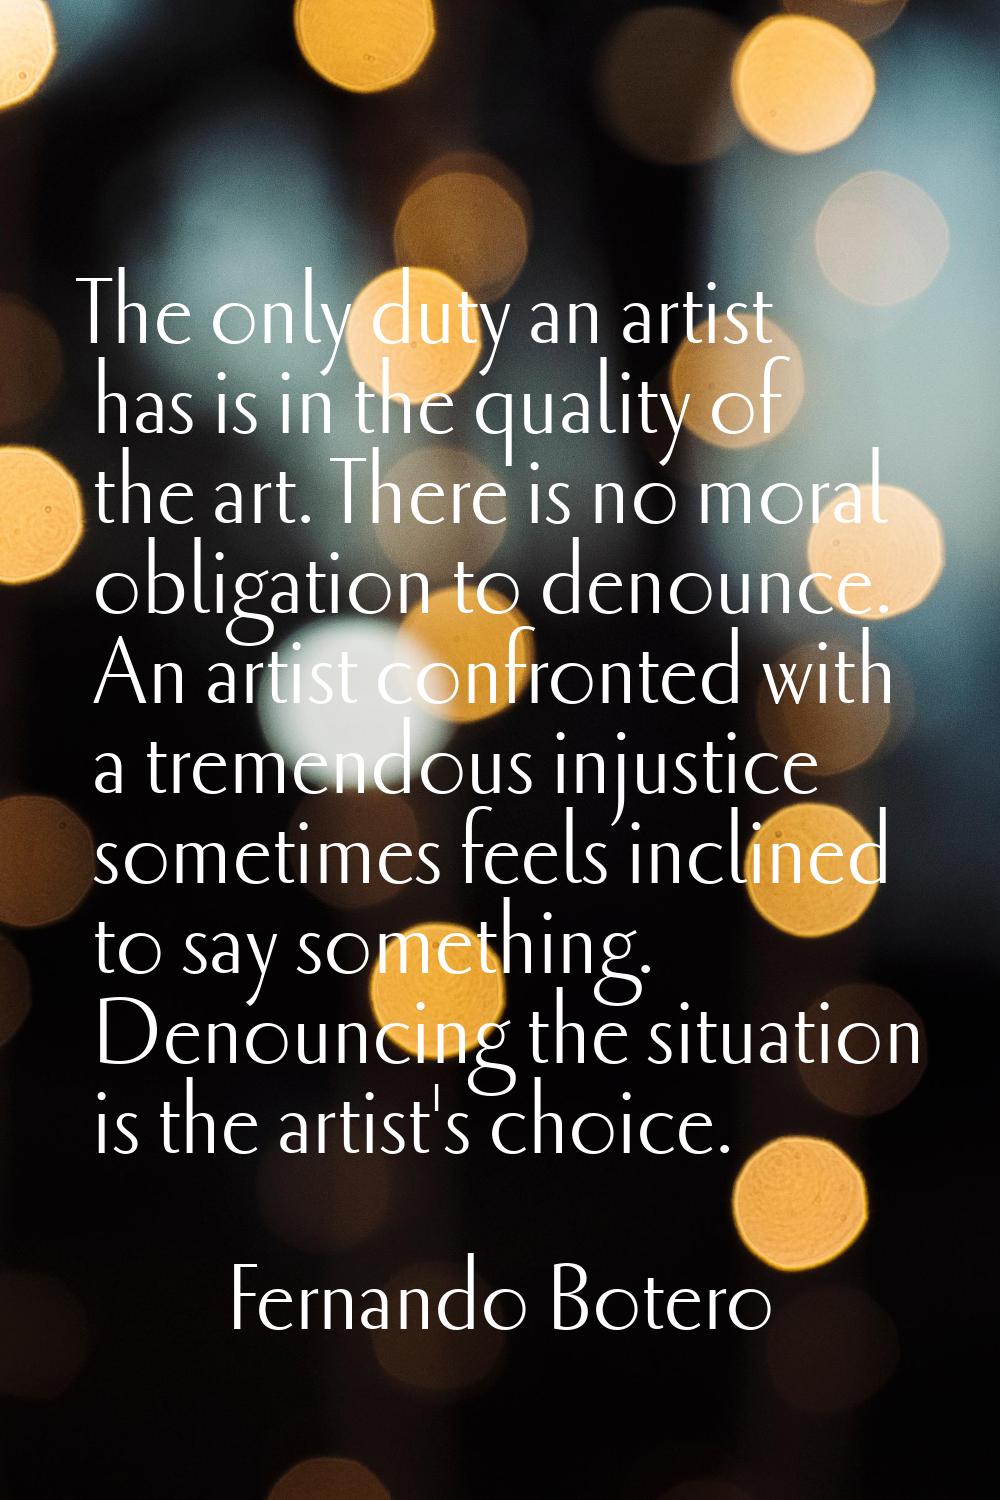 The only duty an artist has is in the quality of the art. There is no moral obligation to denounce.